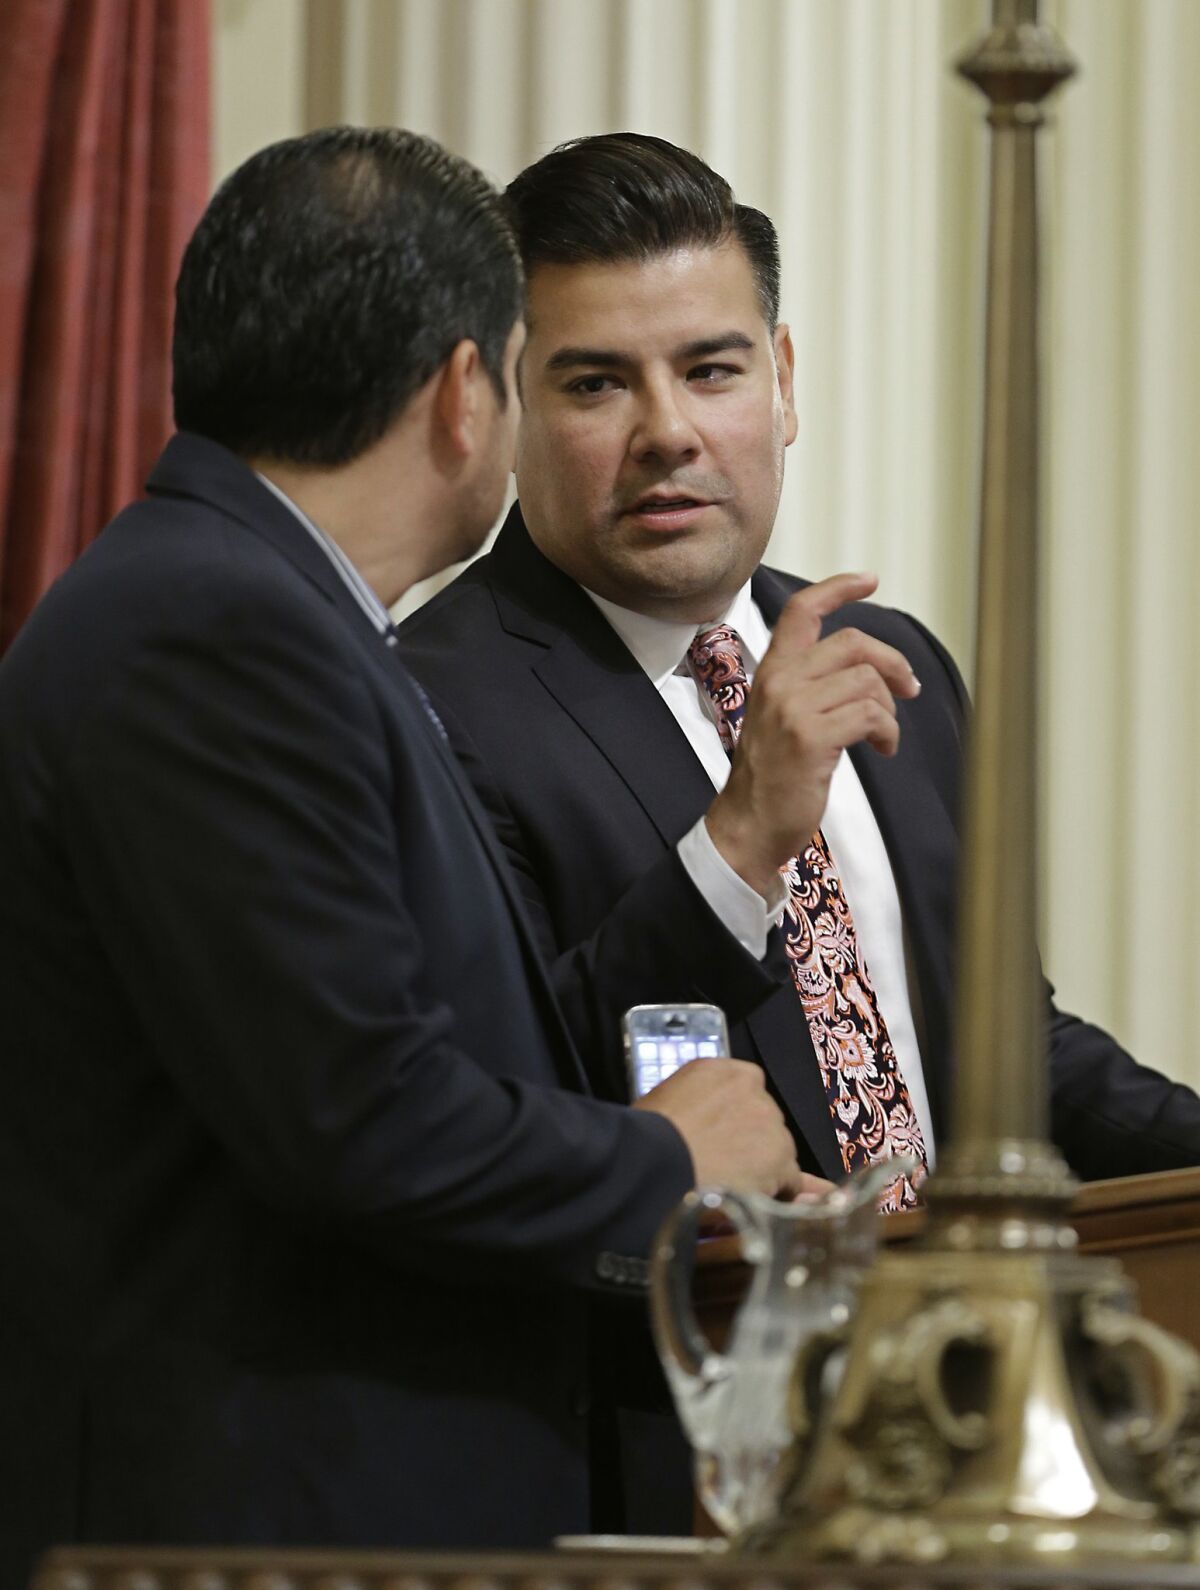 State Sen. Ricardo Lara, D-Bell Gardens, right, talks with Sen. Ben Hueso, D- San Diego, during the Senate session in Sacramento, Calif., Thursday, May 28, 2015. By a 28-11 vote the Senate approved Lara's bill, SB482, that will require California doctors to a check a statewide database before prescribing narcotics and sent it to the Assembly. (AP Photo/Rich Pedroncelli)